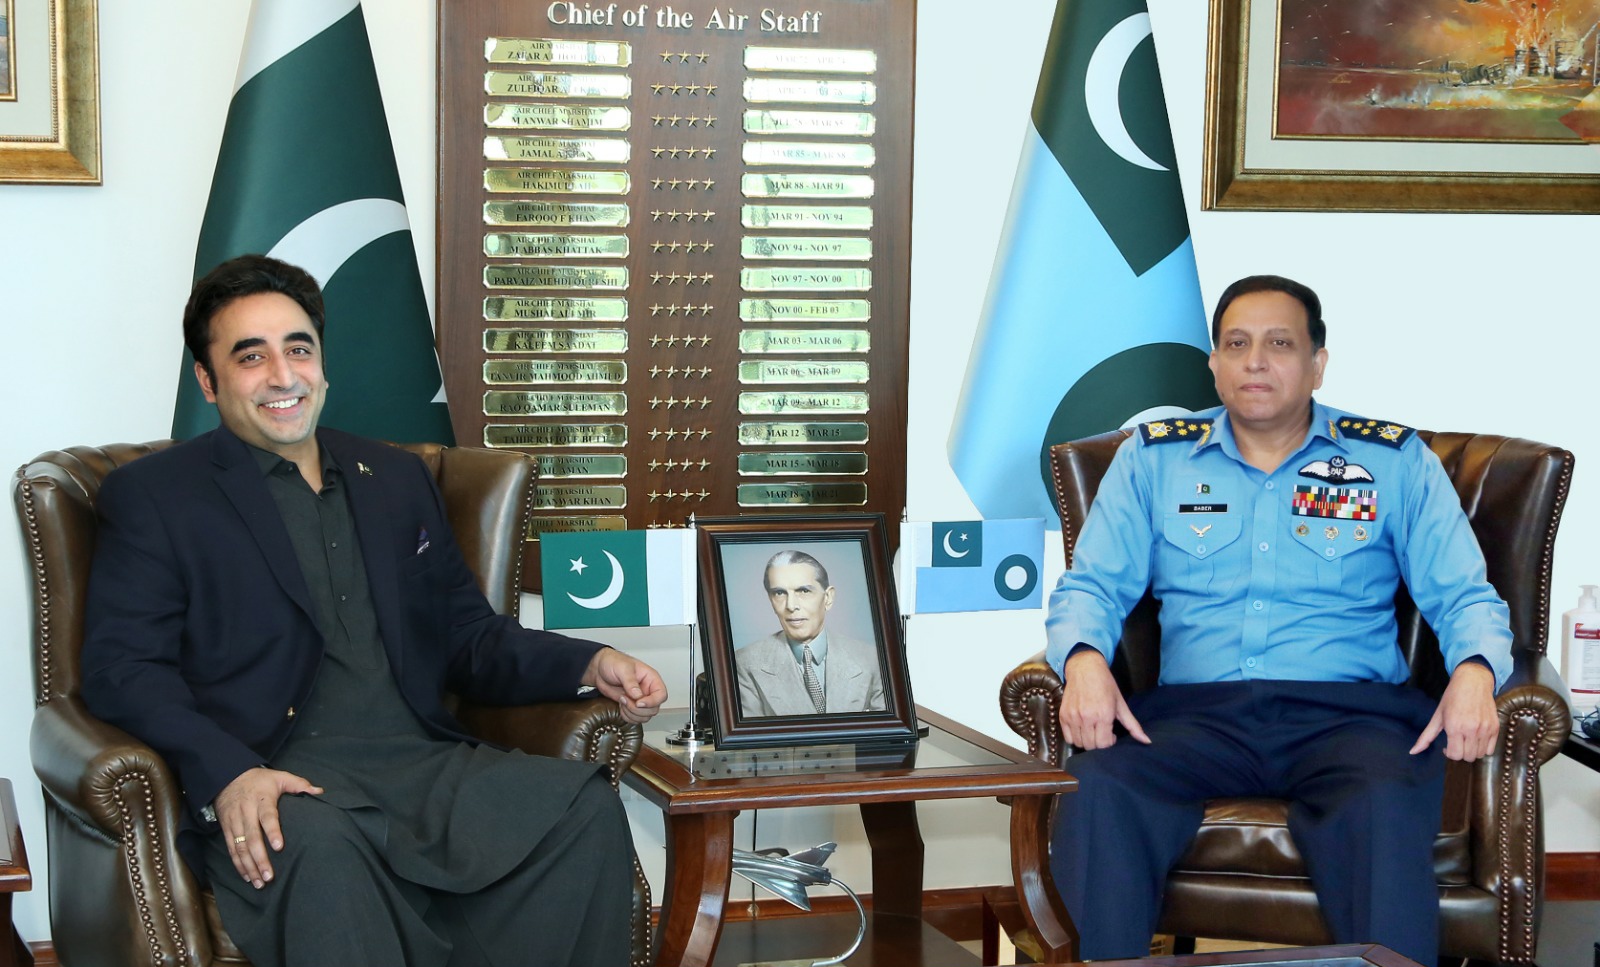 FOREIGN MINISTER OF PAKISTAN CALLS ON AIR CHIEF.